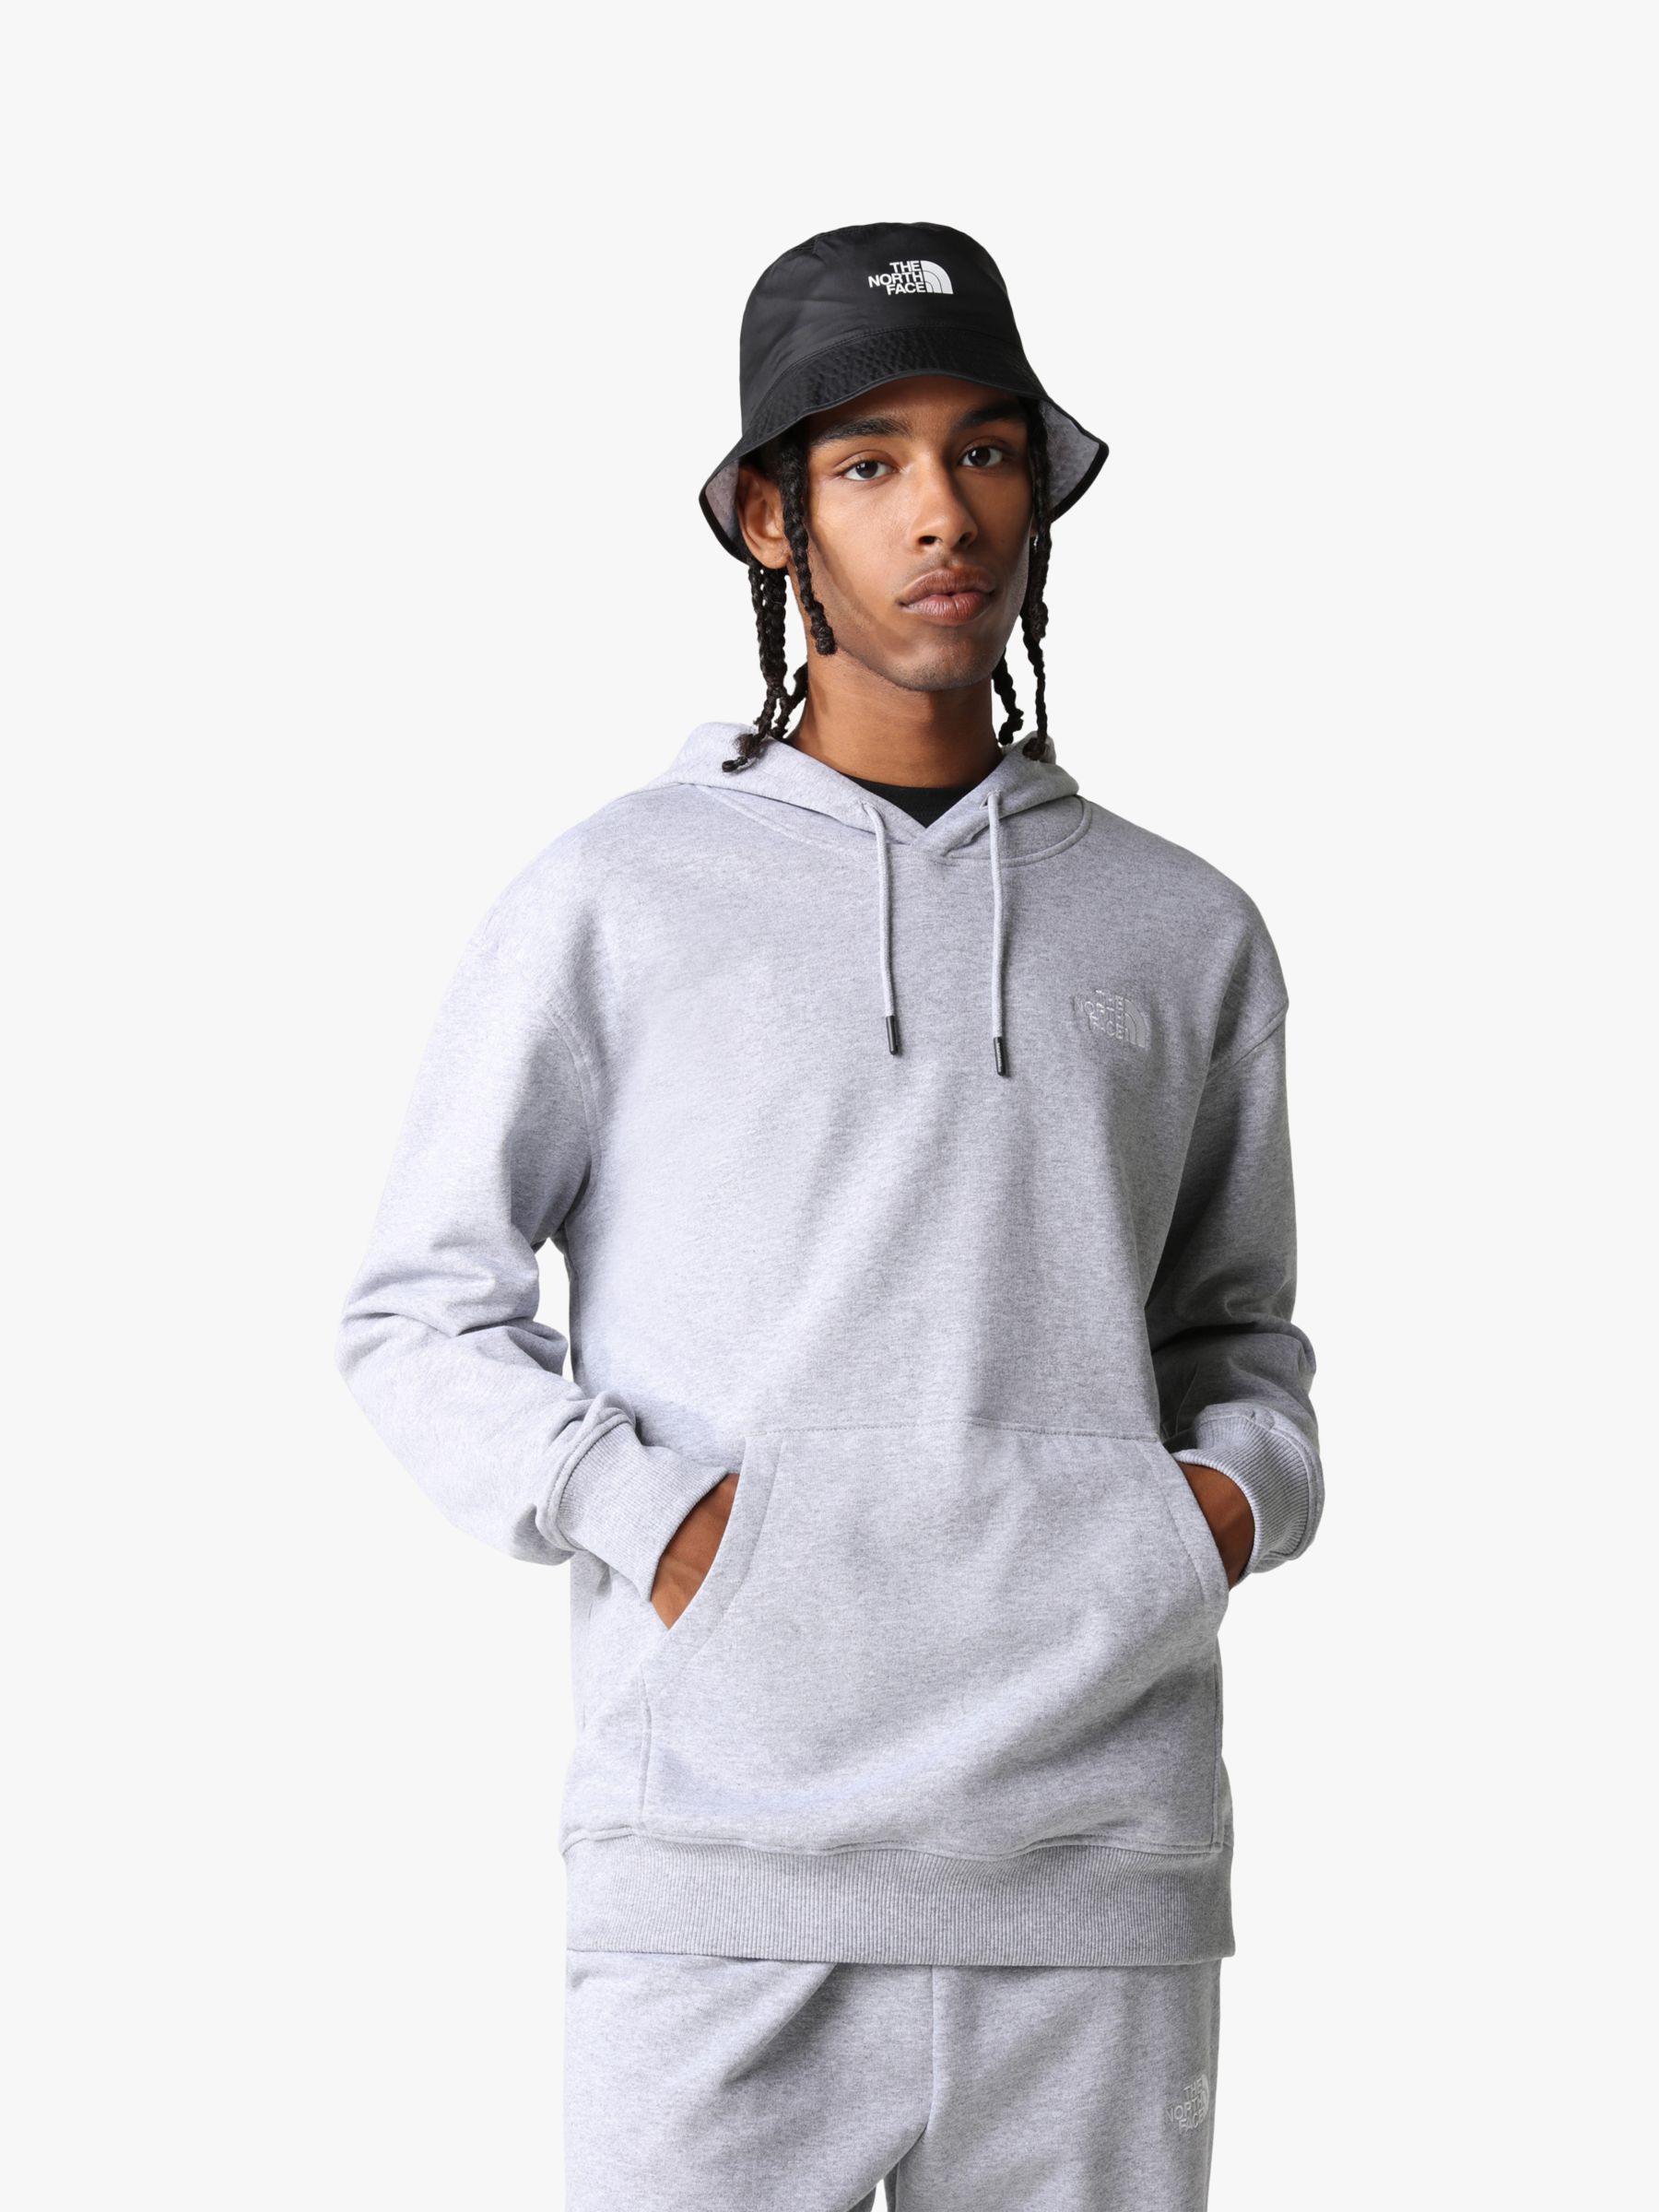 The North Face Essential Relaxed Fit Hoodie, Light Grey Heather, S